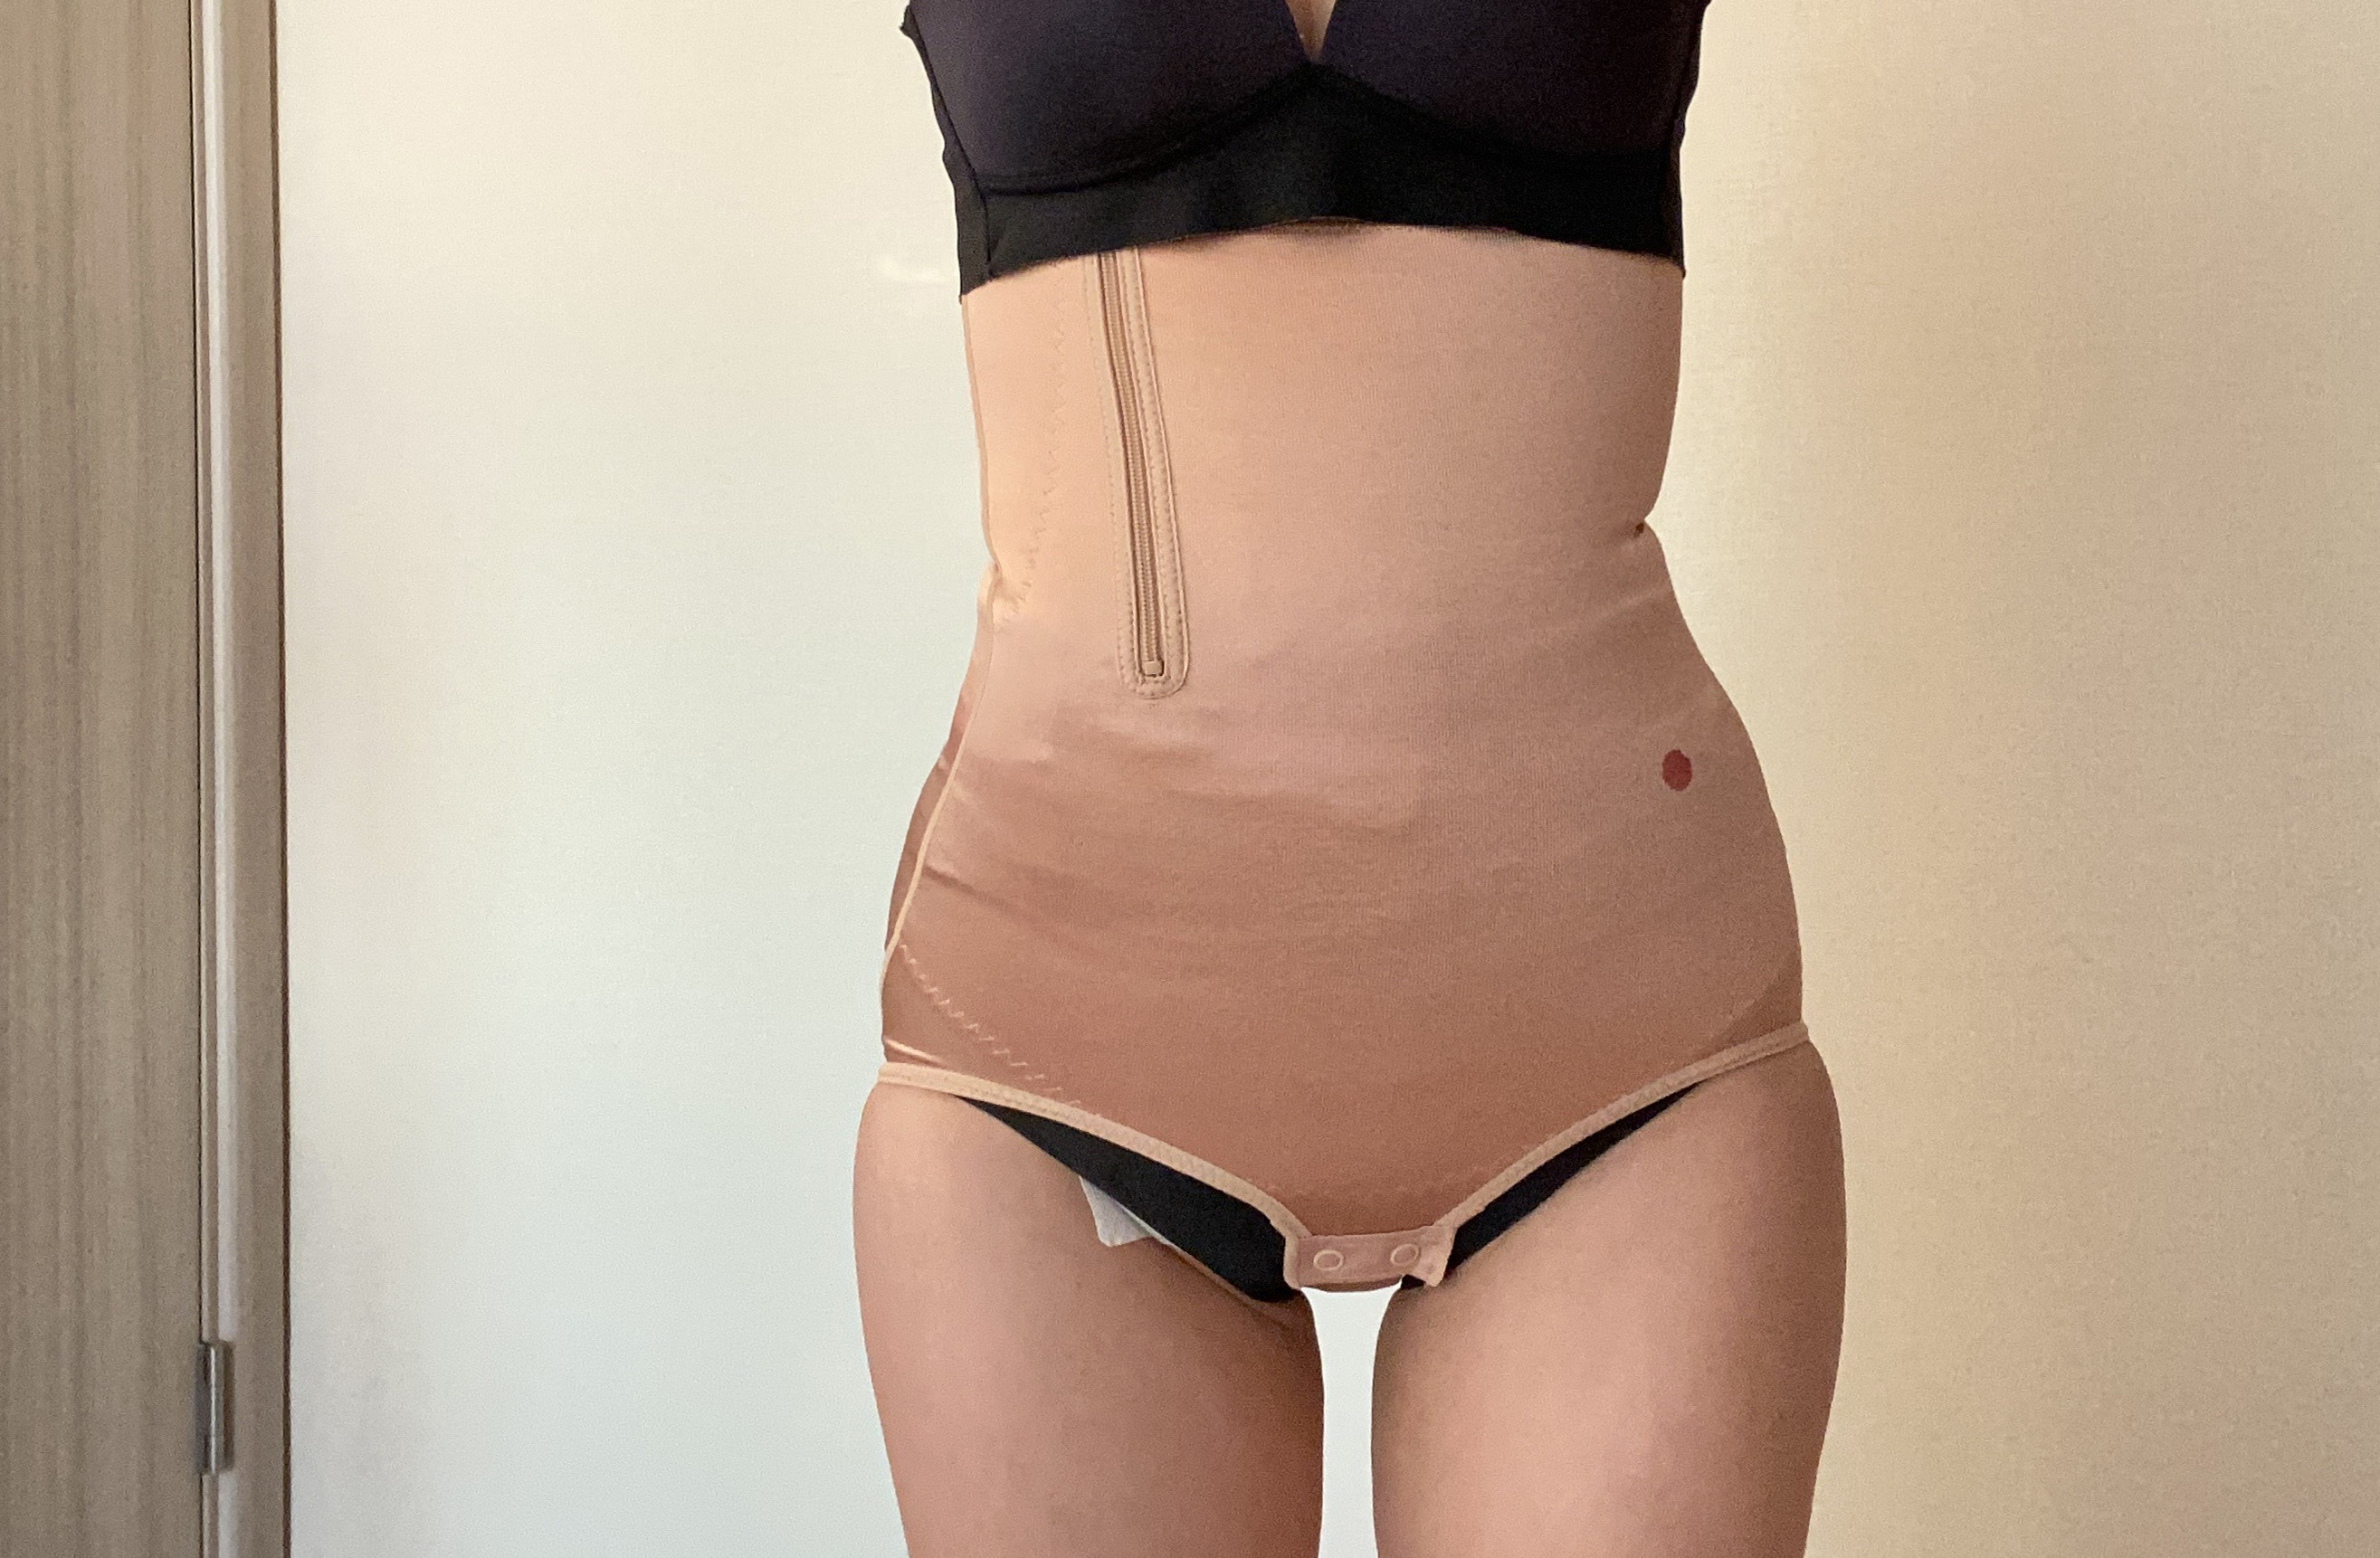 What to Wear After Tummy Tuck